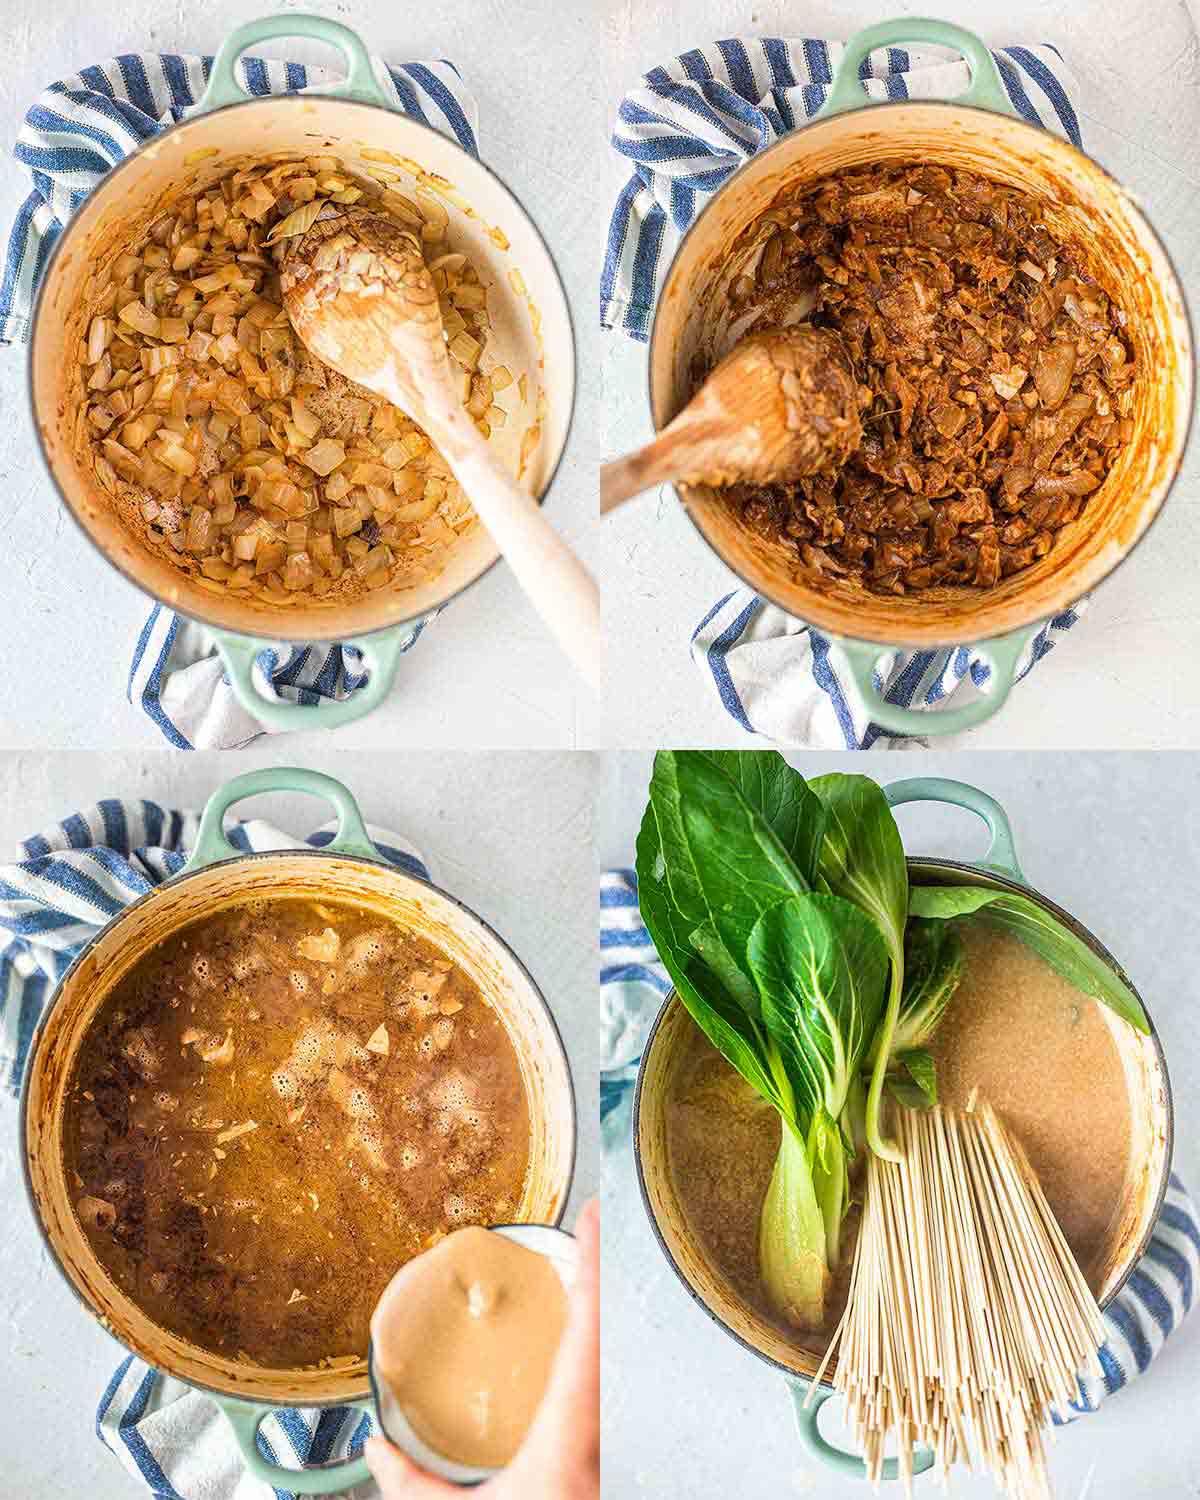 Step-by-step pictures of how to make easy vegan ramen in one pot.